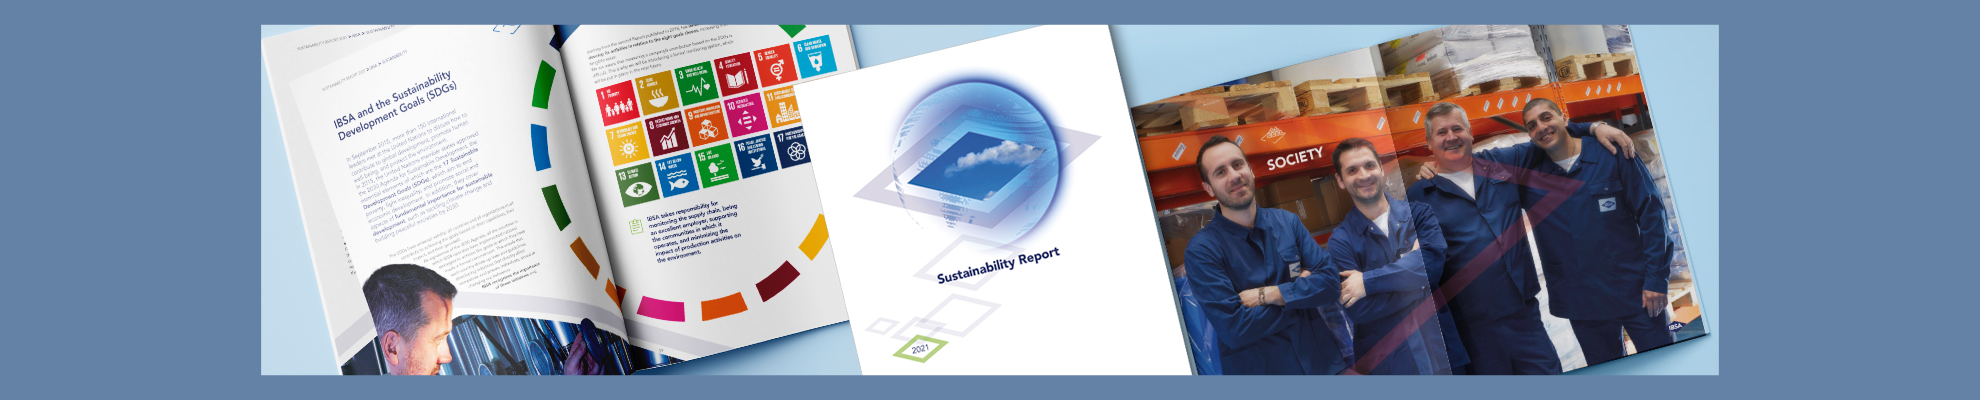 The 4th IBSA Sustainability Report